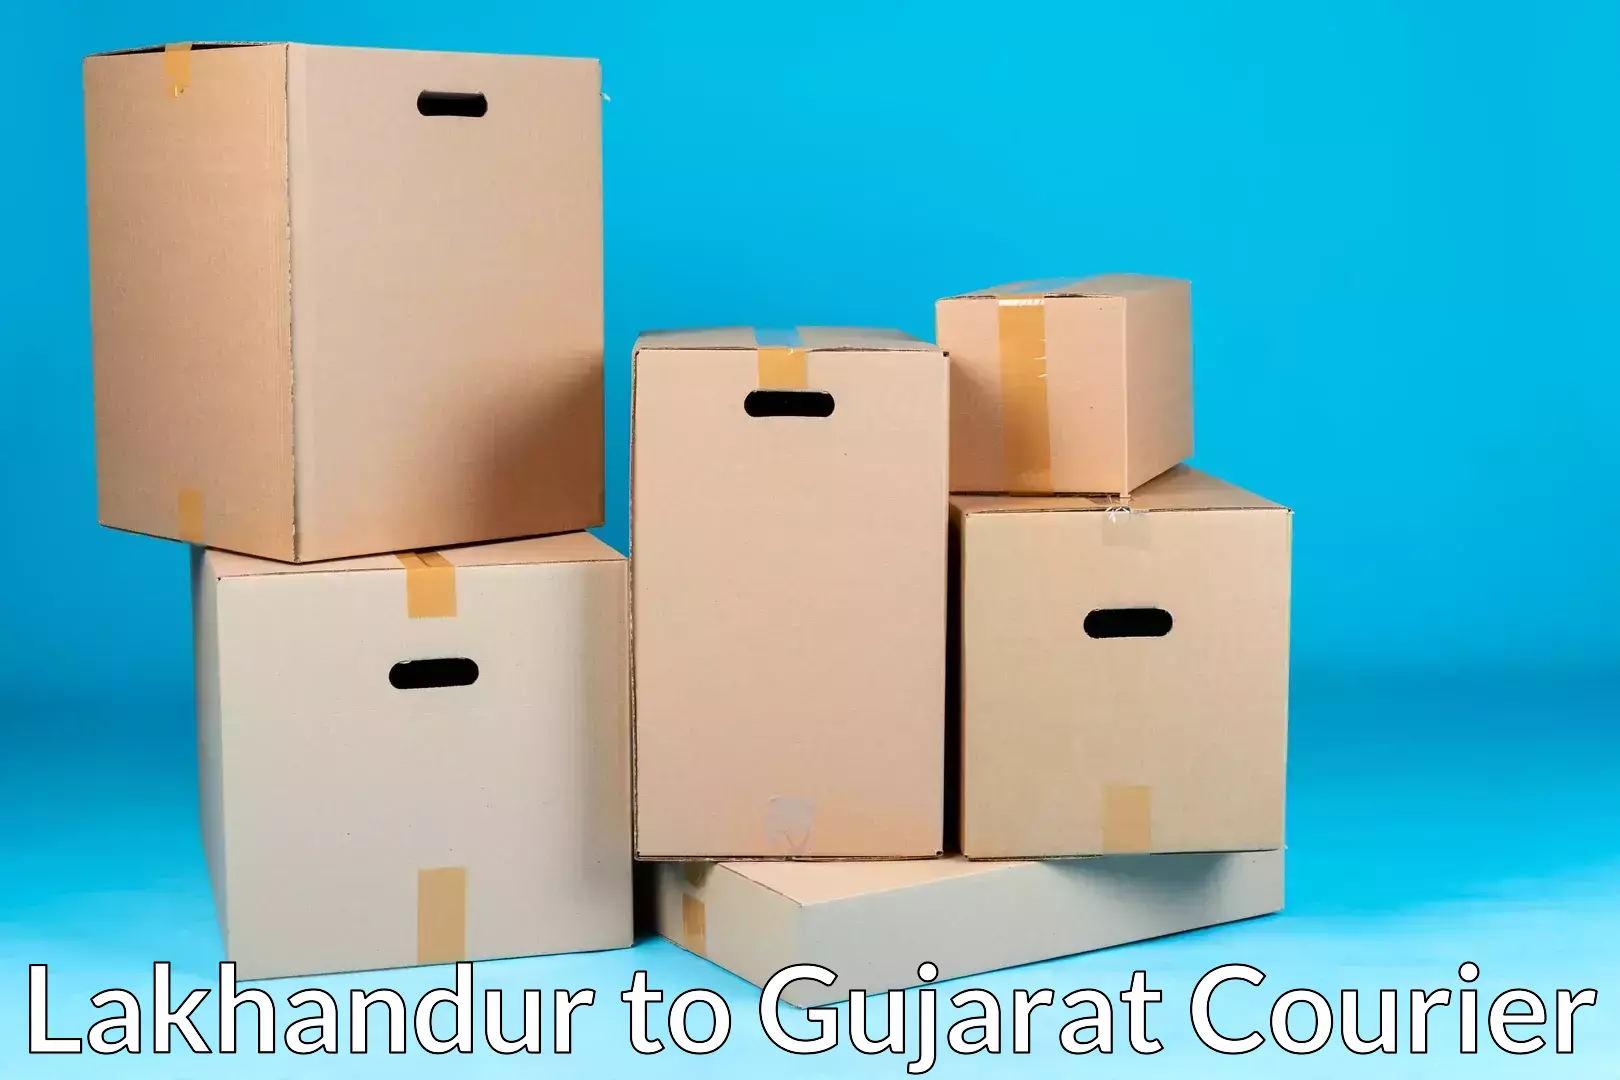 Moving and packing experts Lakhandur to Sanand